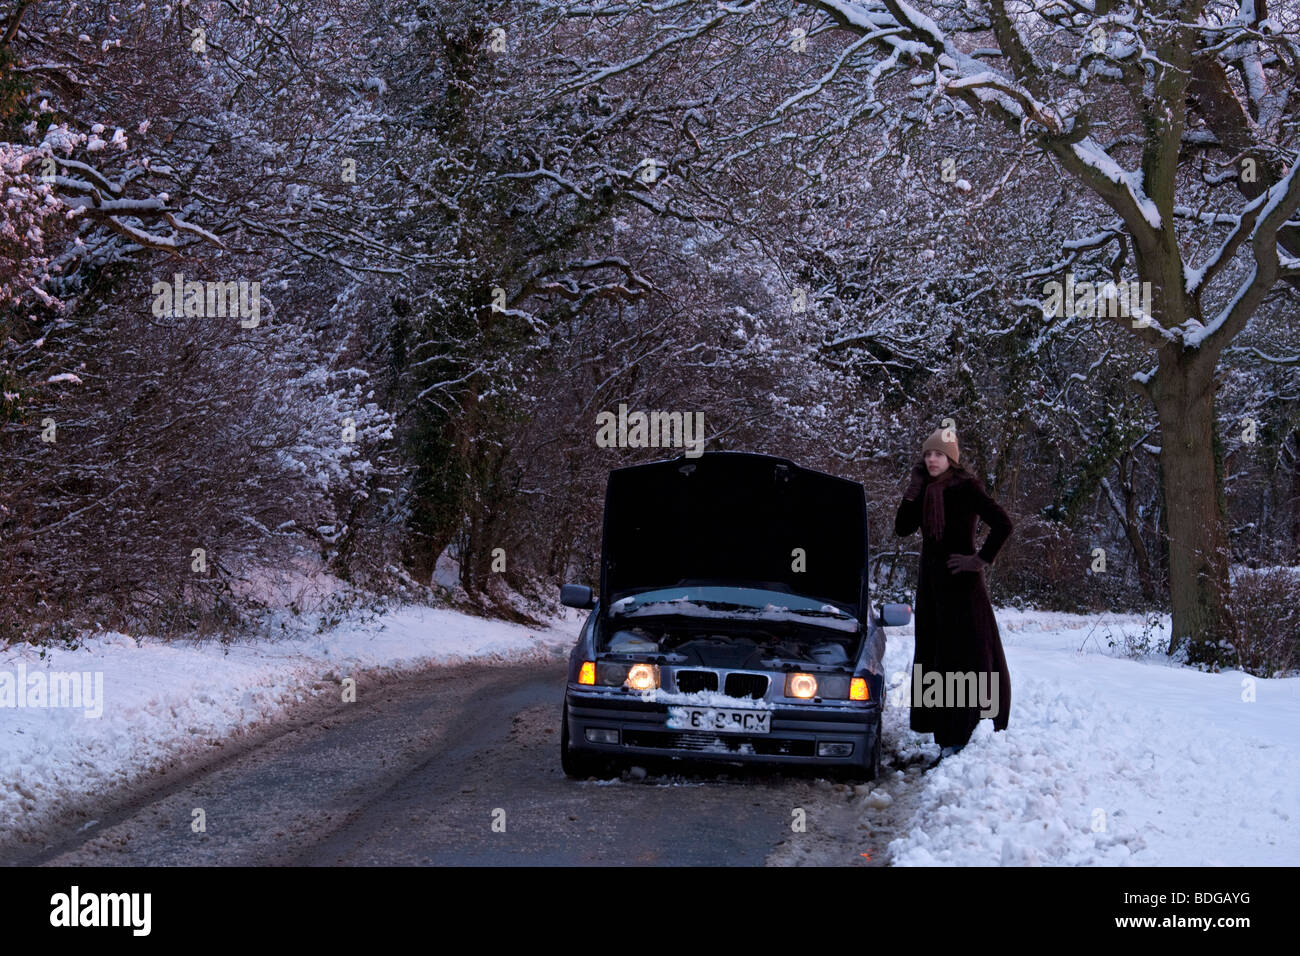 Women on her own with broken down car in the snow,stranded trying to get it fixed. Stock Photo